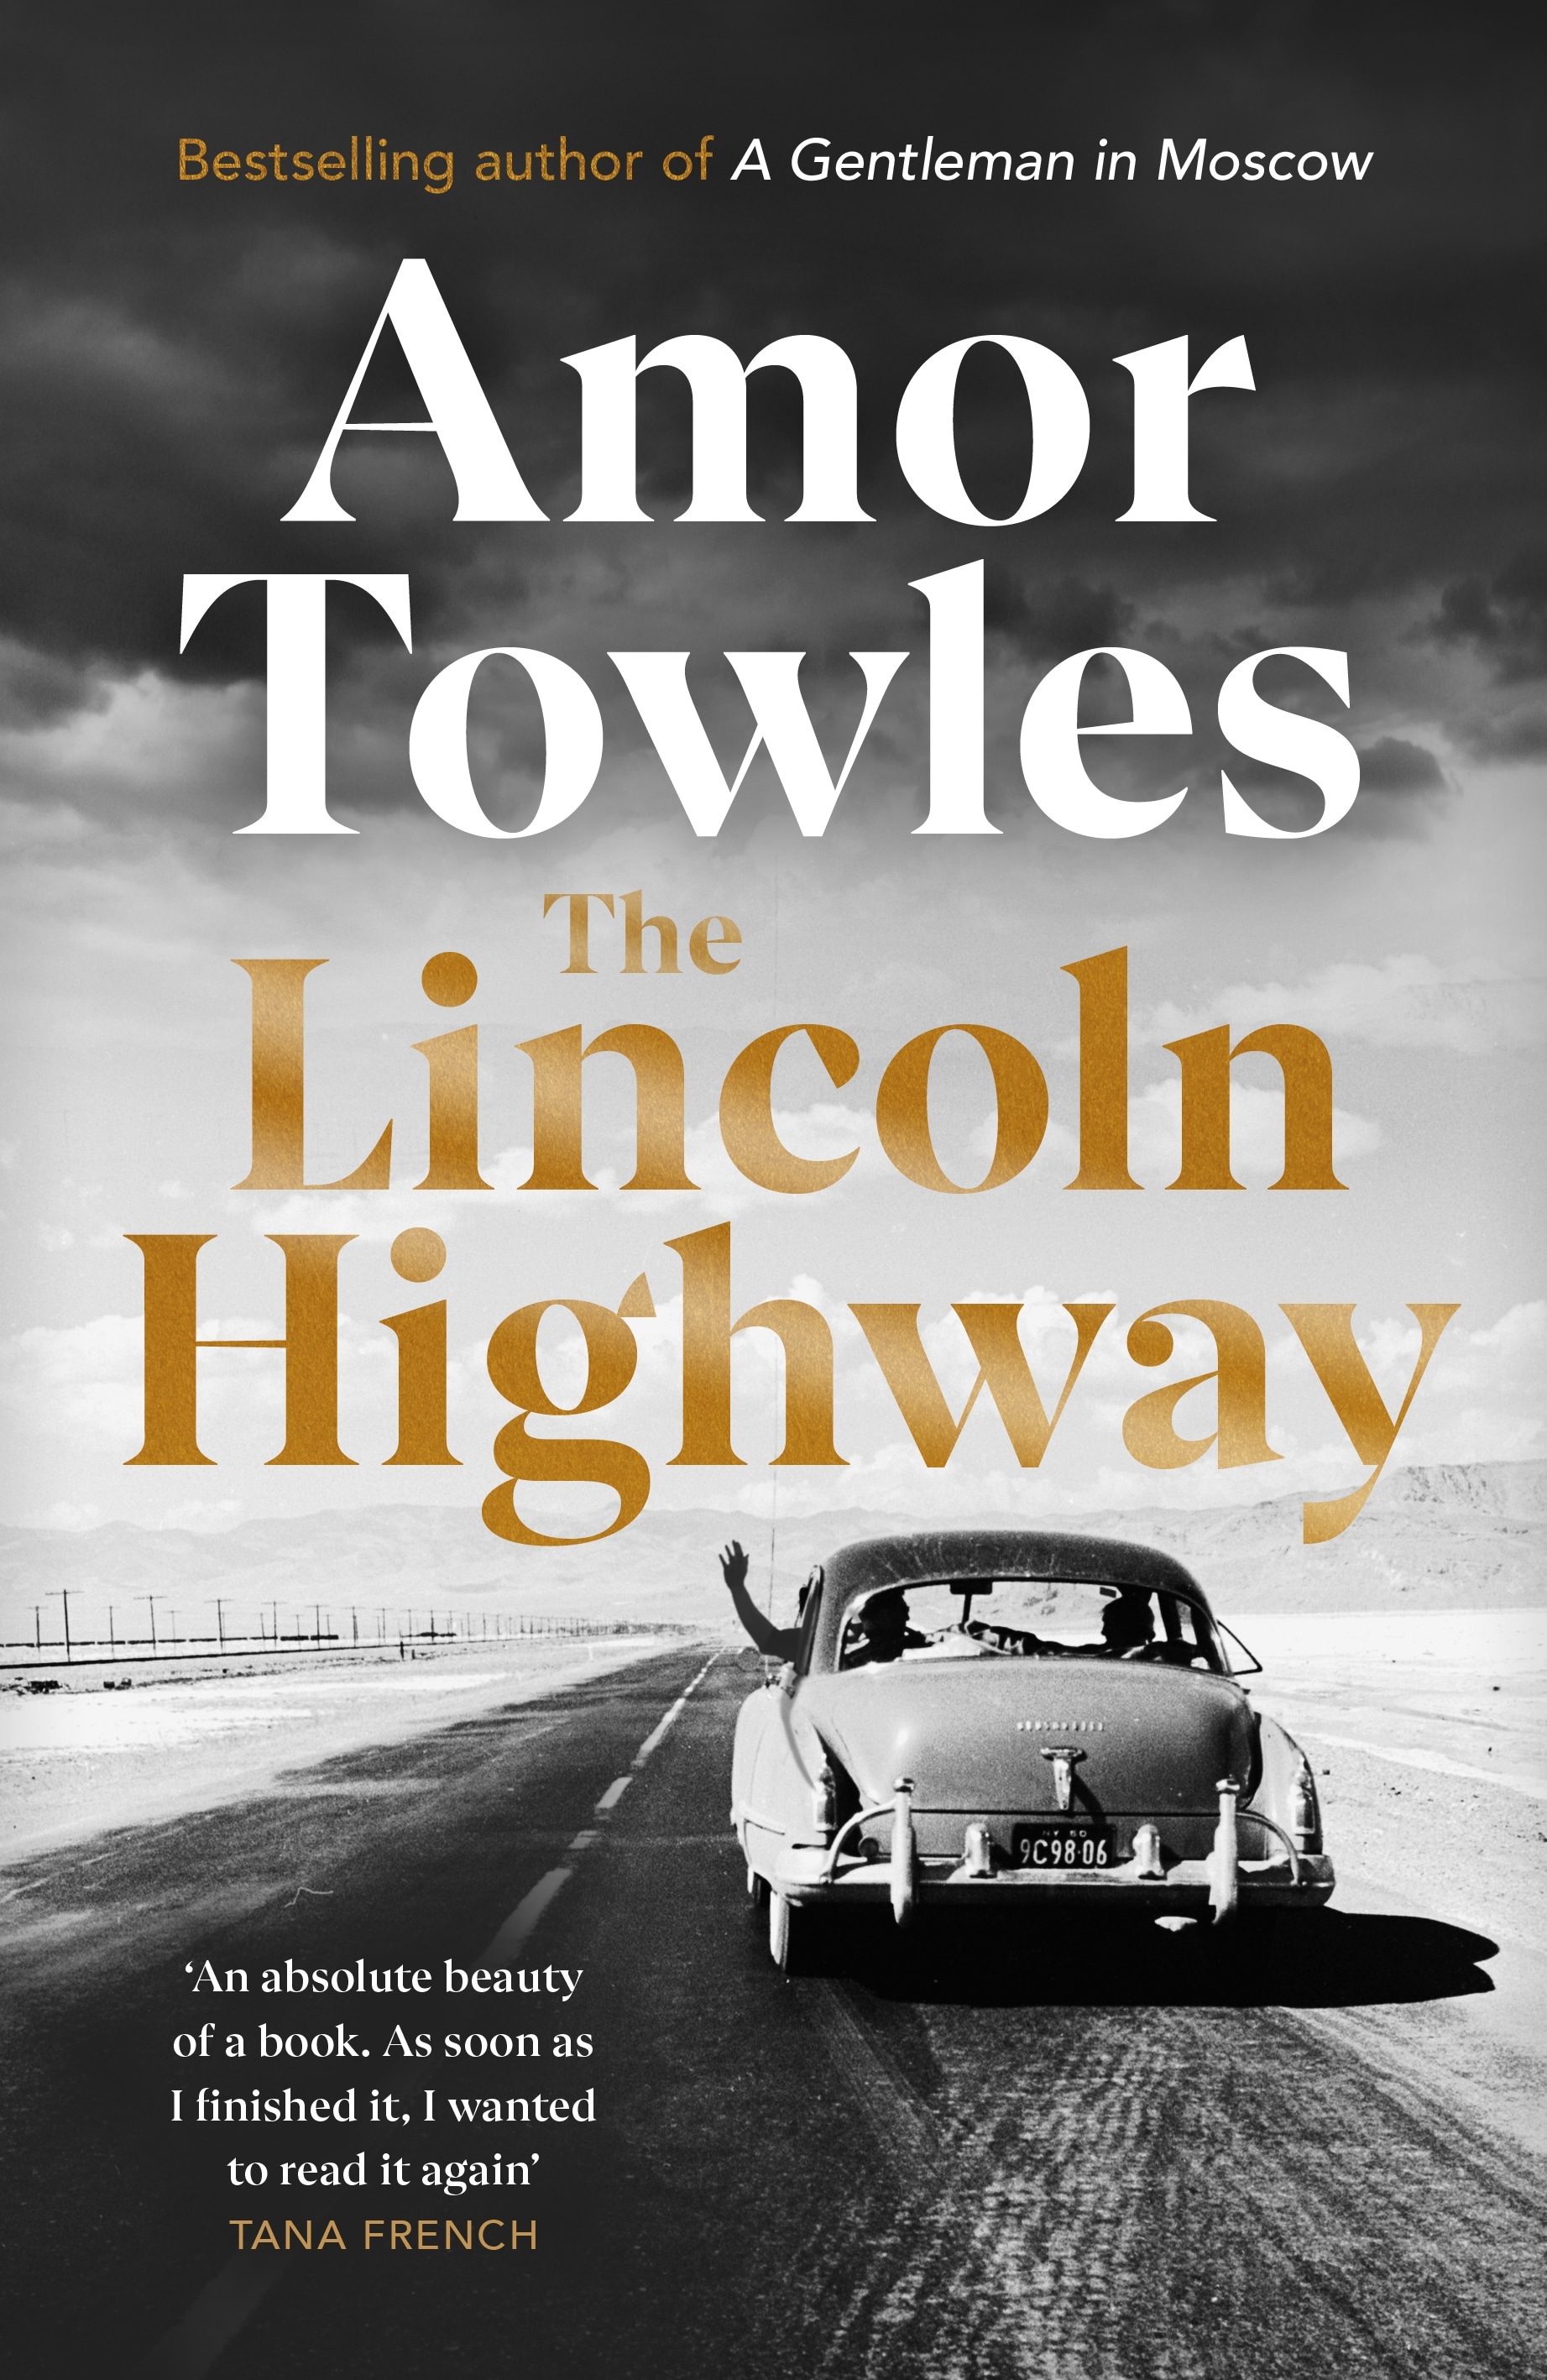 Book “The Lincoln Highway” by Amor Towles — October 21, 2021